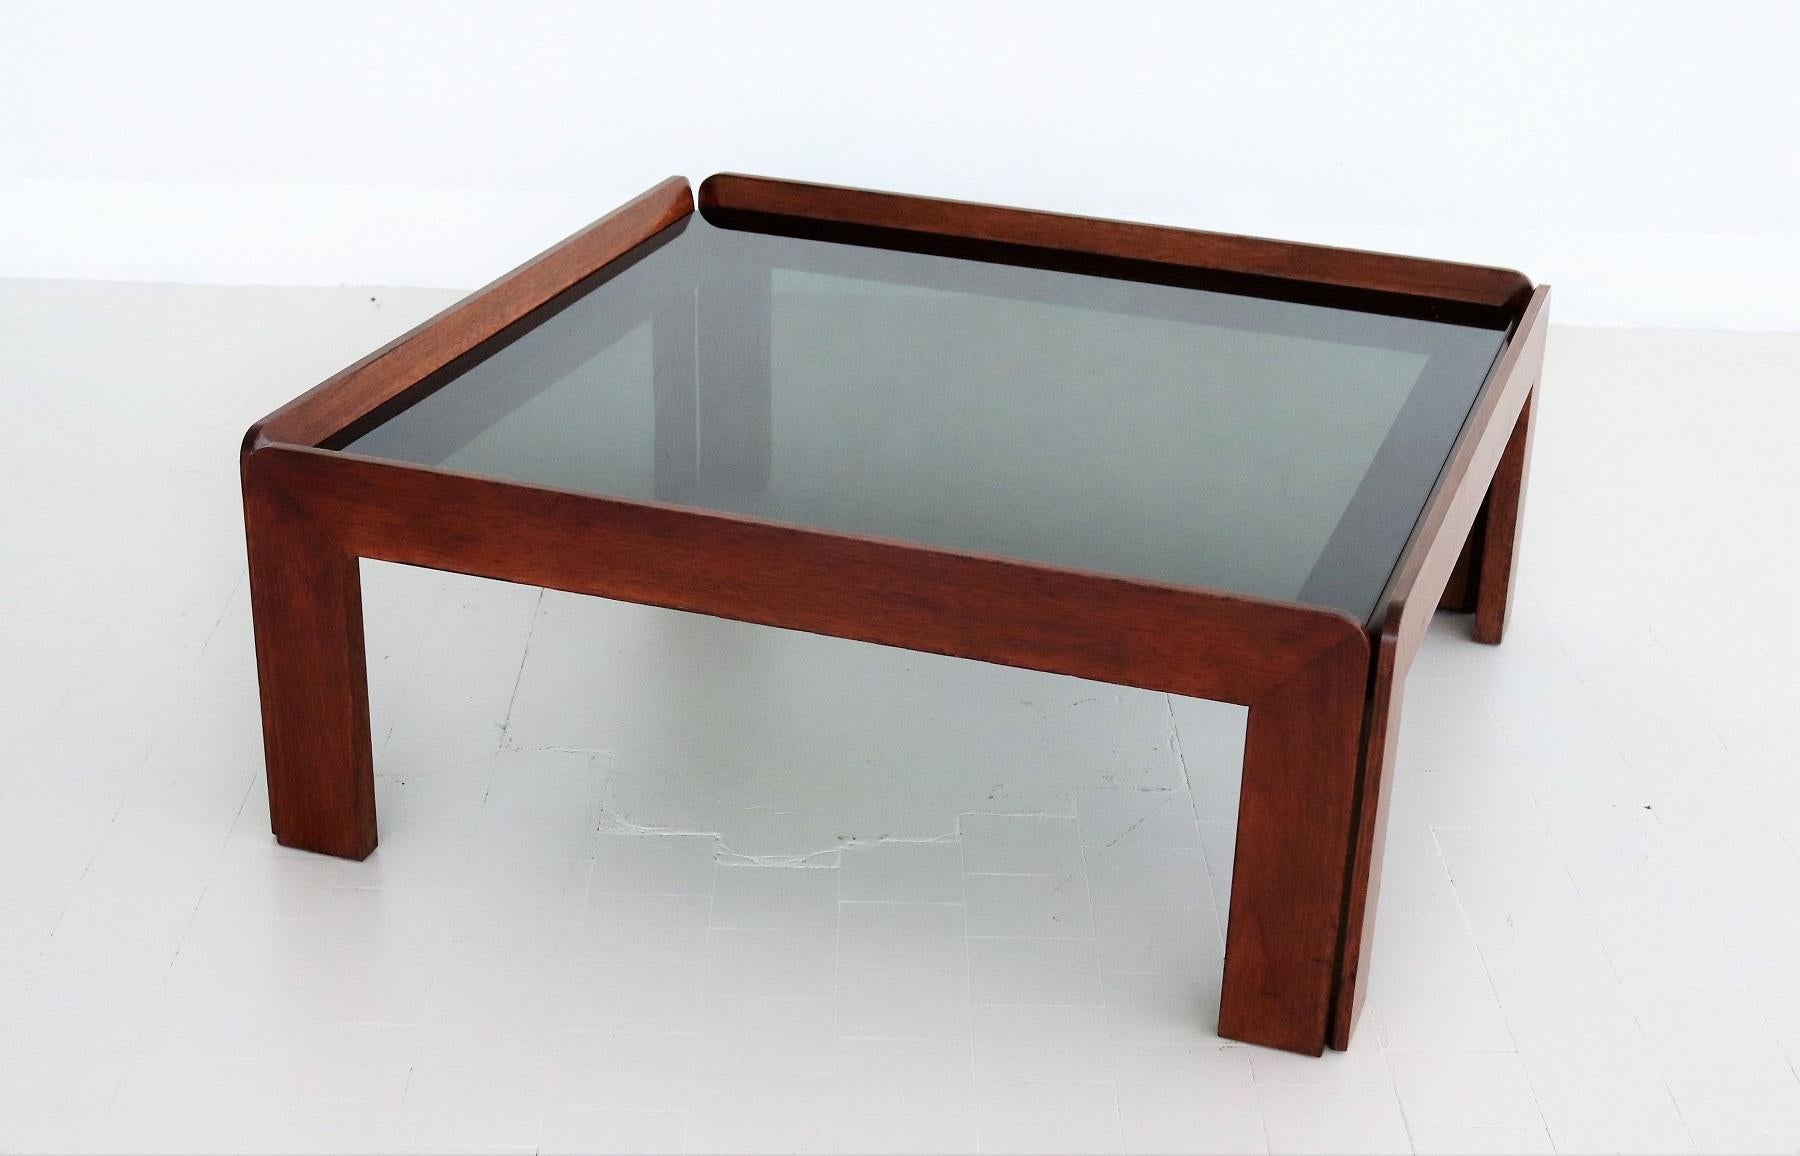 Italian Midcentury Square Coffee Table in Beechwood and Smoked Glass, 1960s For Sale 4